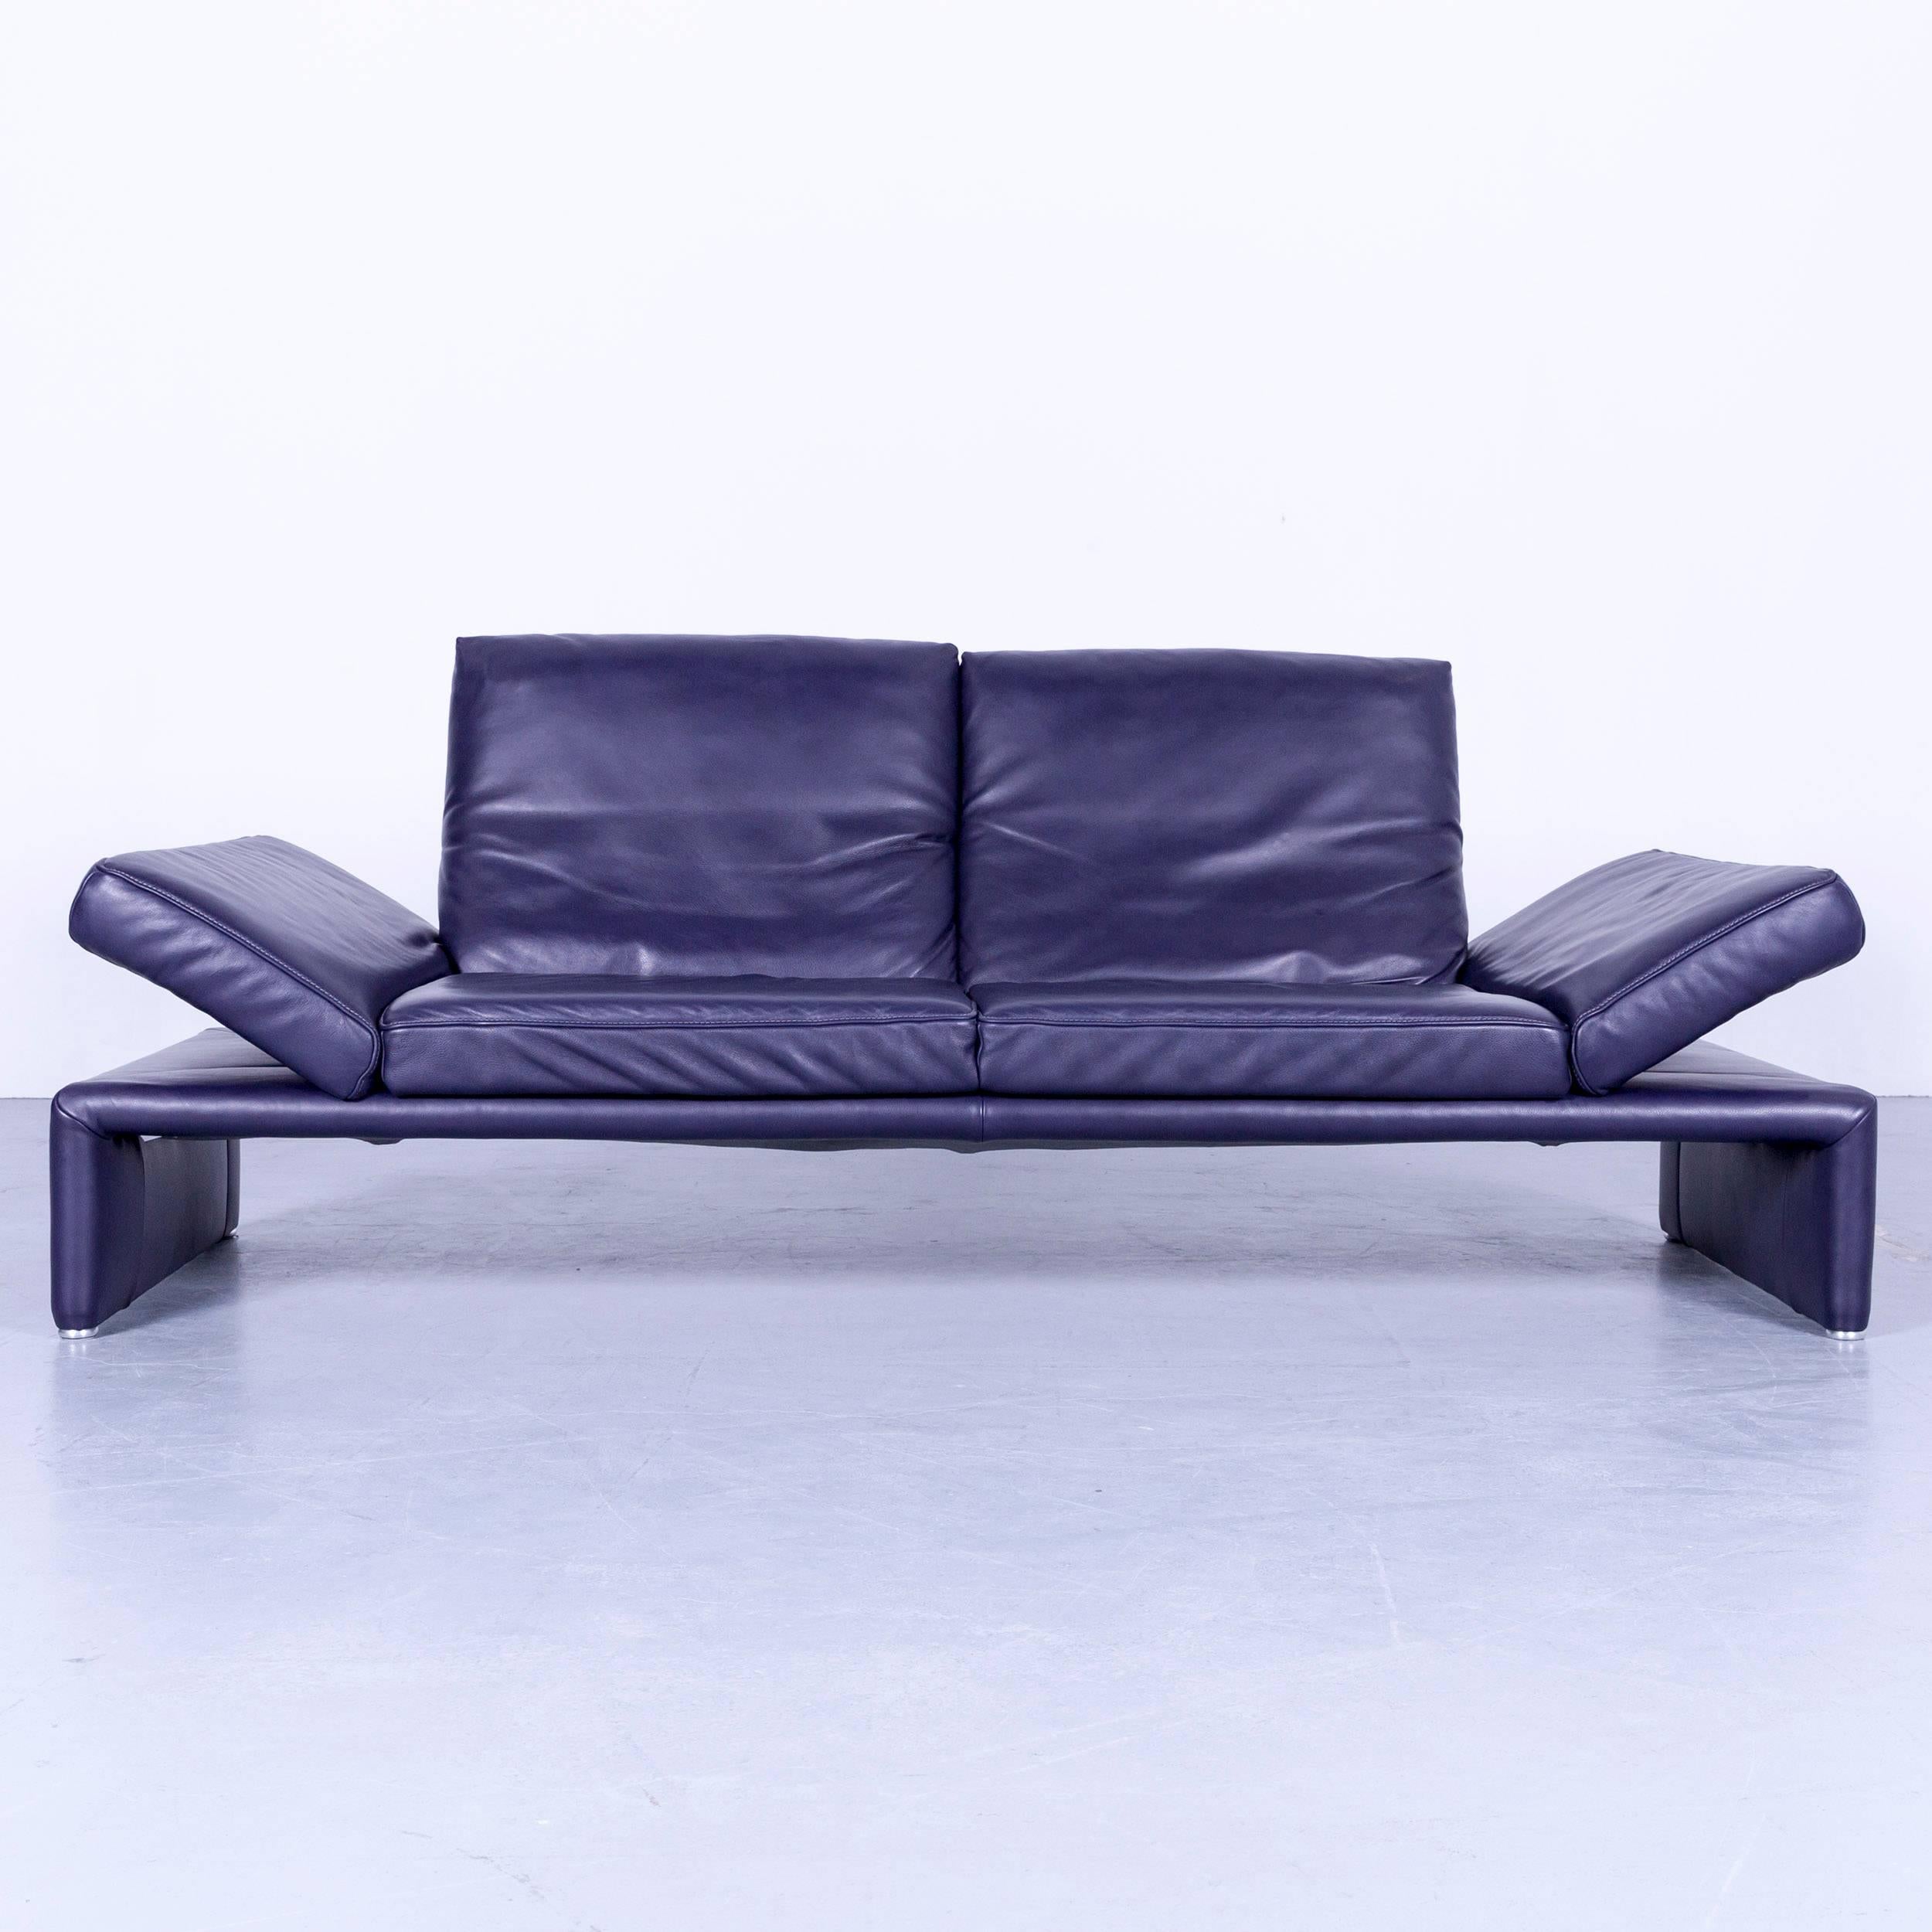 Koinor Raoul designer sofa set purple eggplant leather three-seat couch, with convenient functions, made for pure comfort and flexibility.